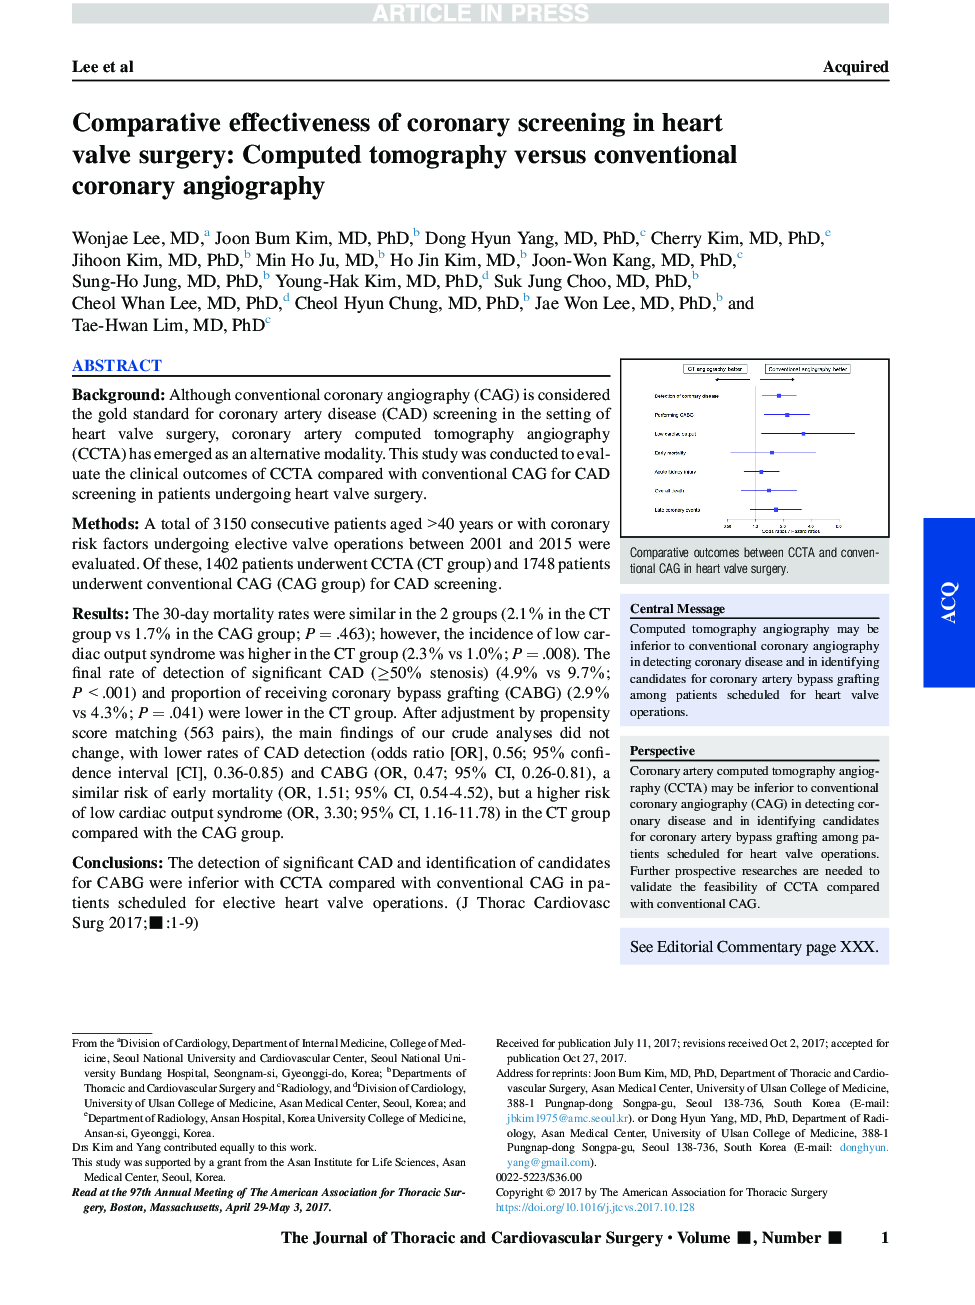 Comparative effectiveness of coronary screening in heart valve surgery: Computed tomography versus conventional coronary angiography